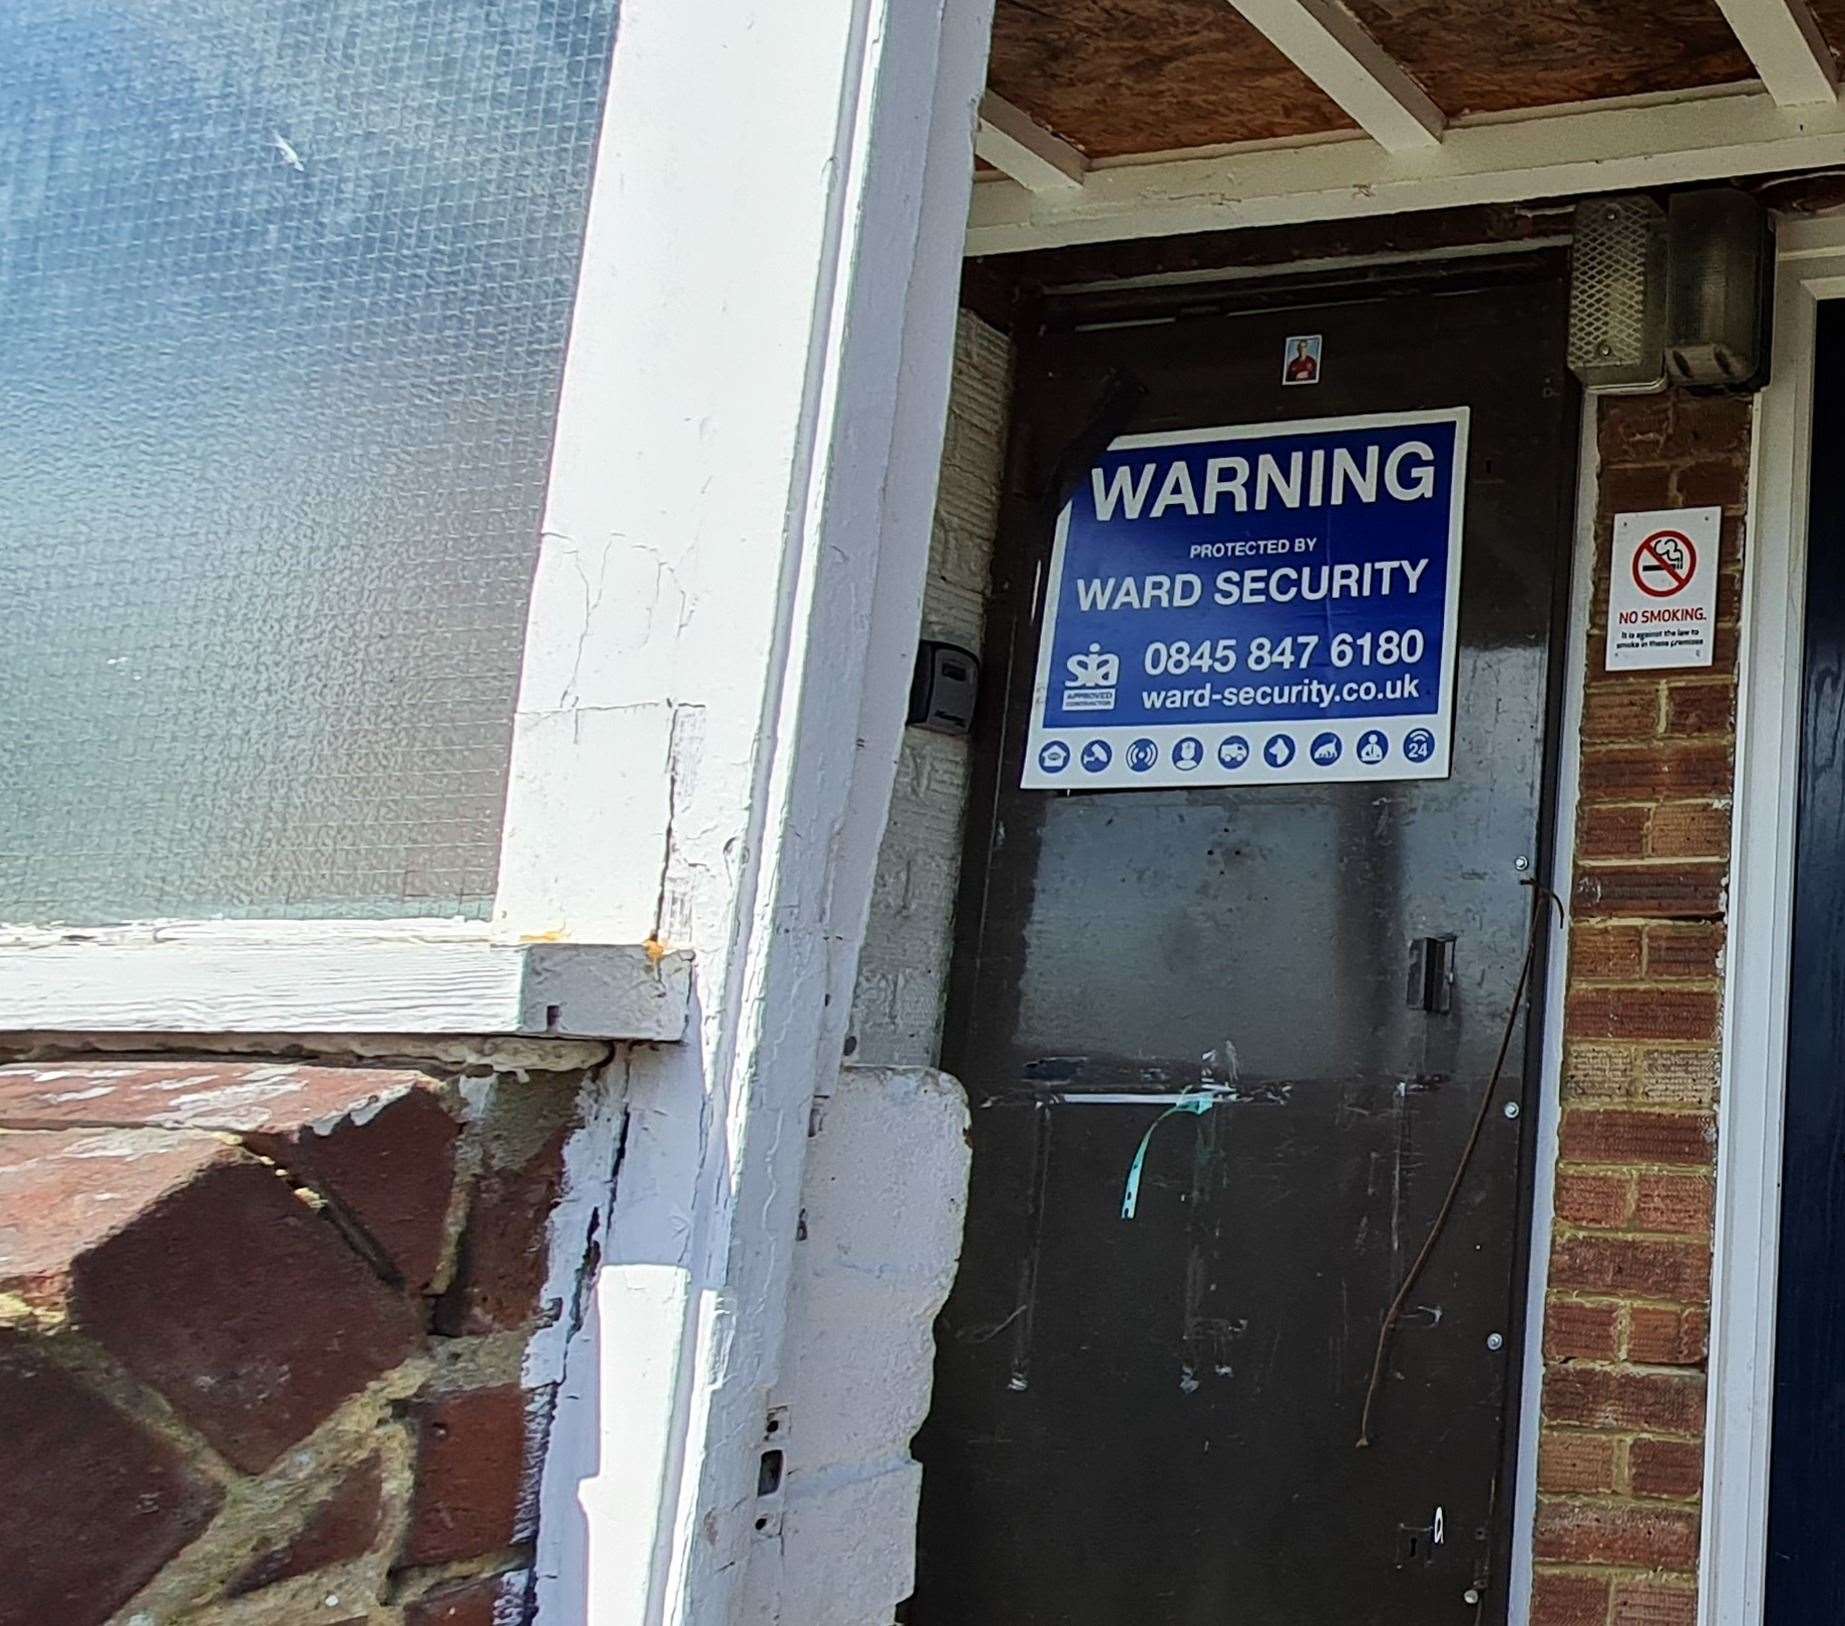 A Closure Order has been put in place at a property in Faversham